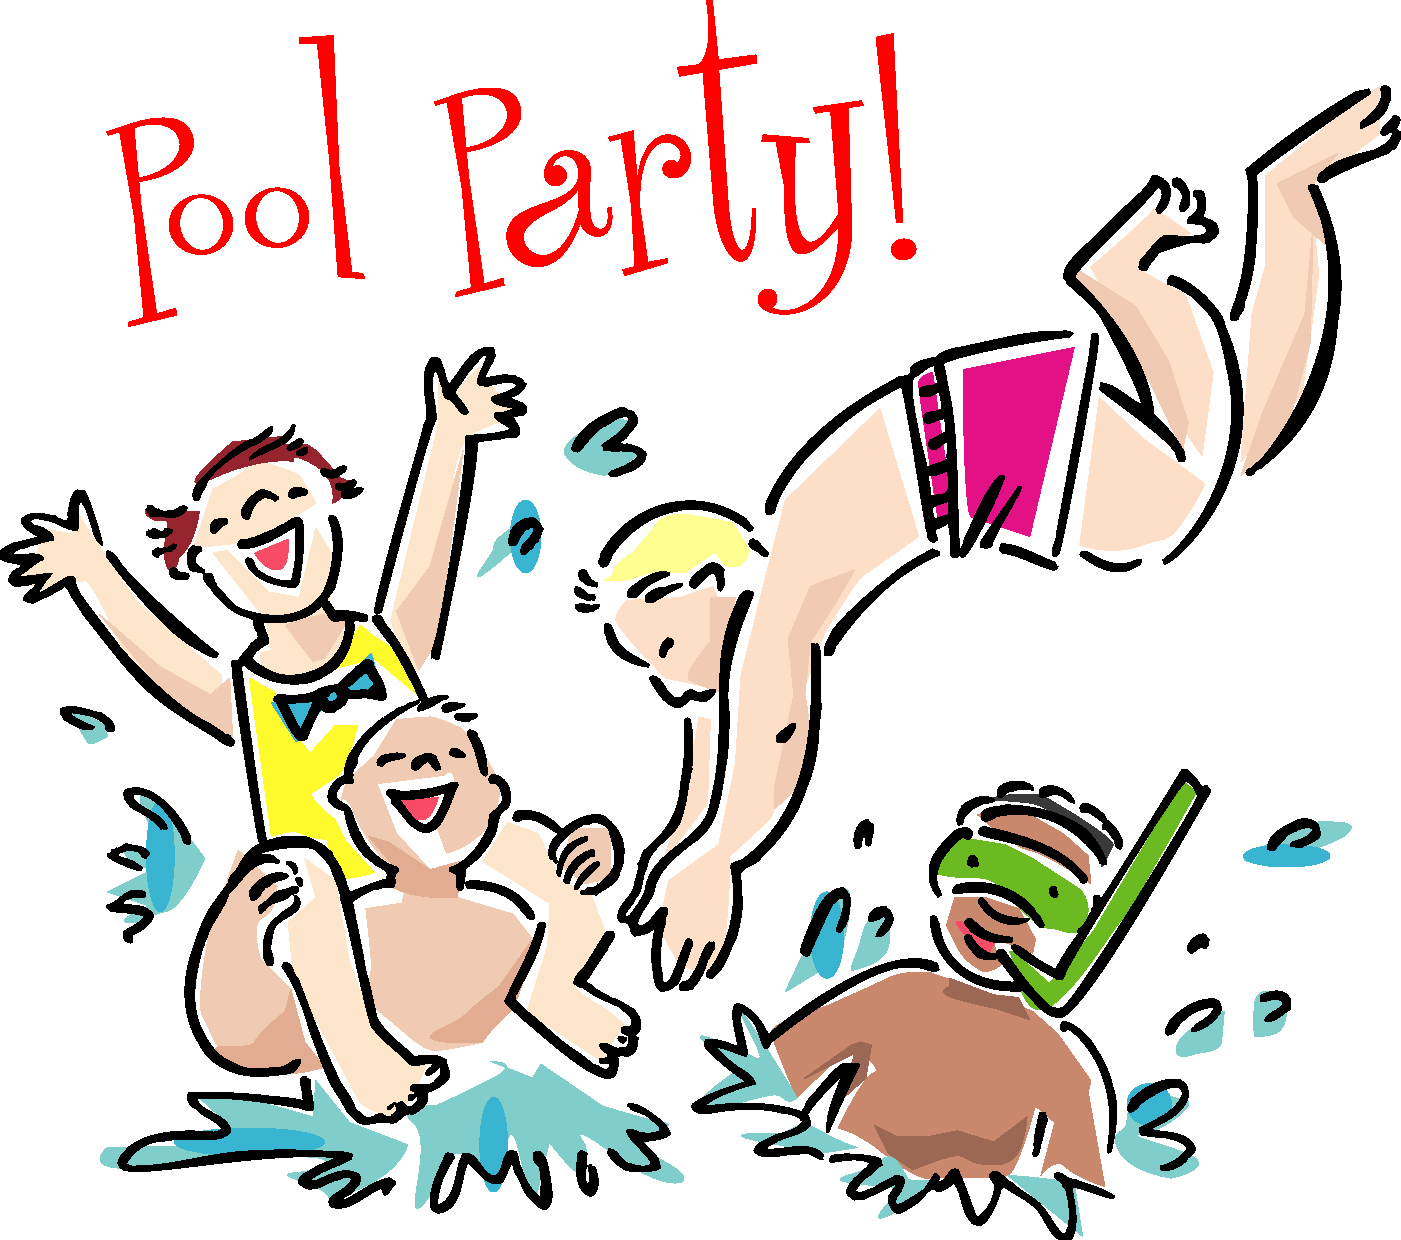 Swimming Pool Cartoon Images | Free Download Clip Art | Free Clip ...